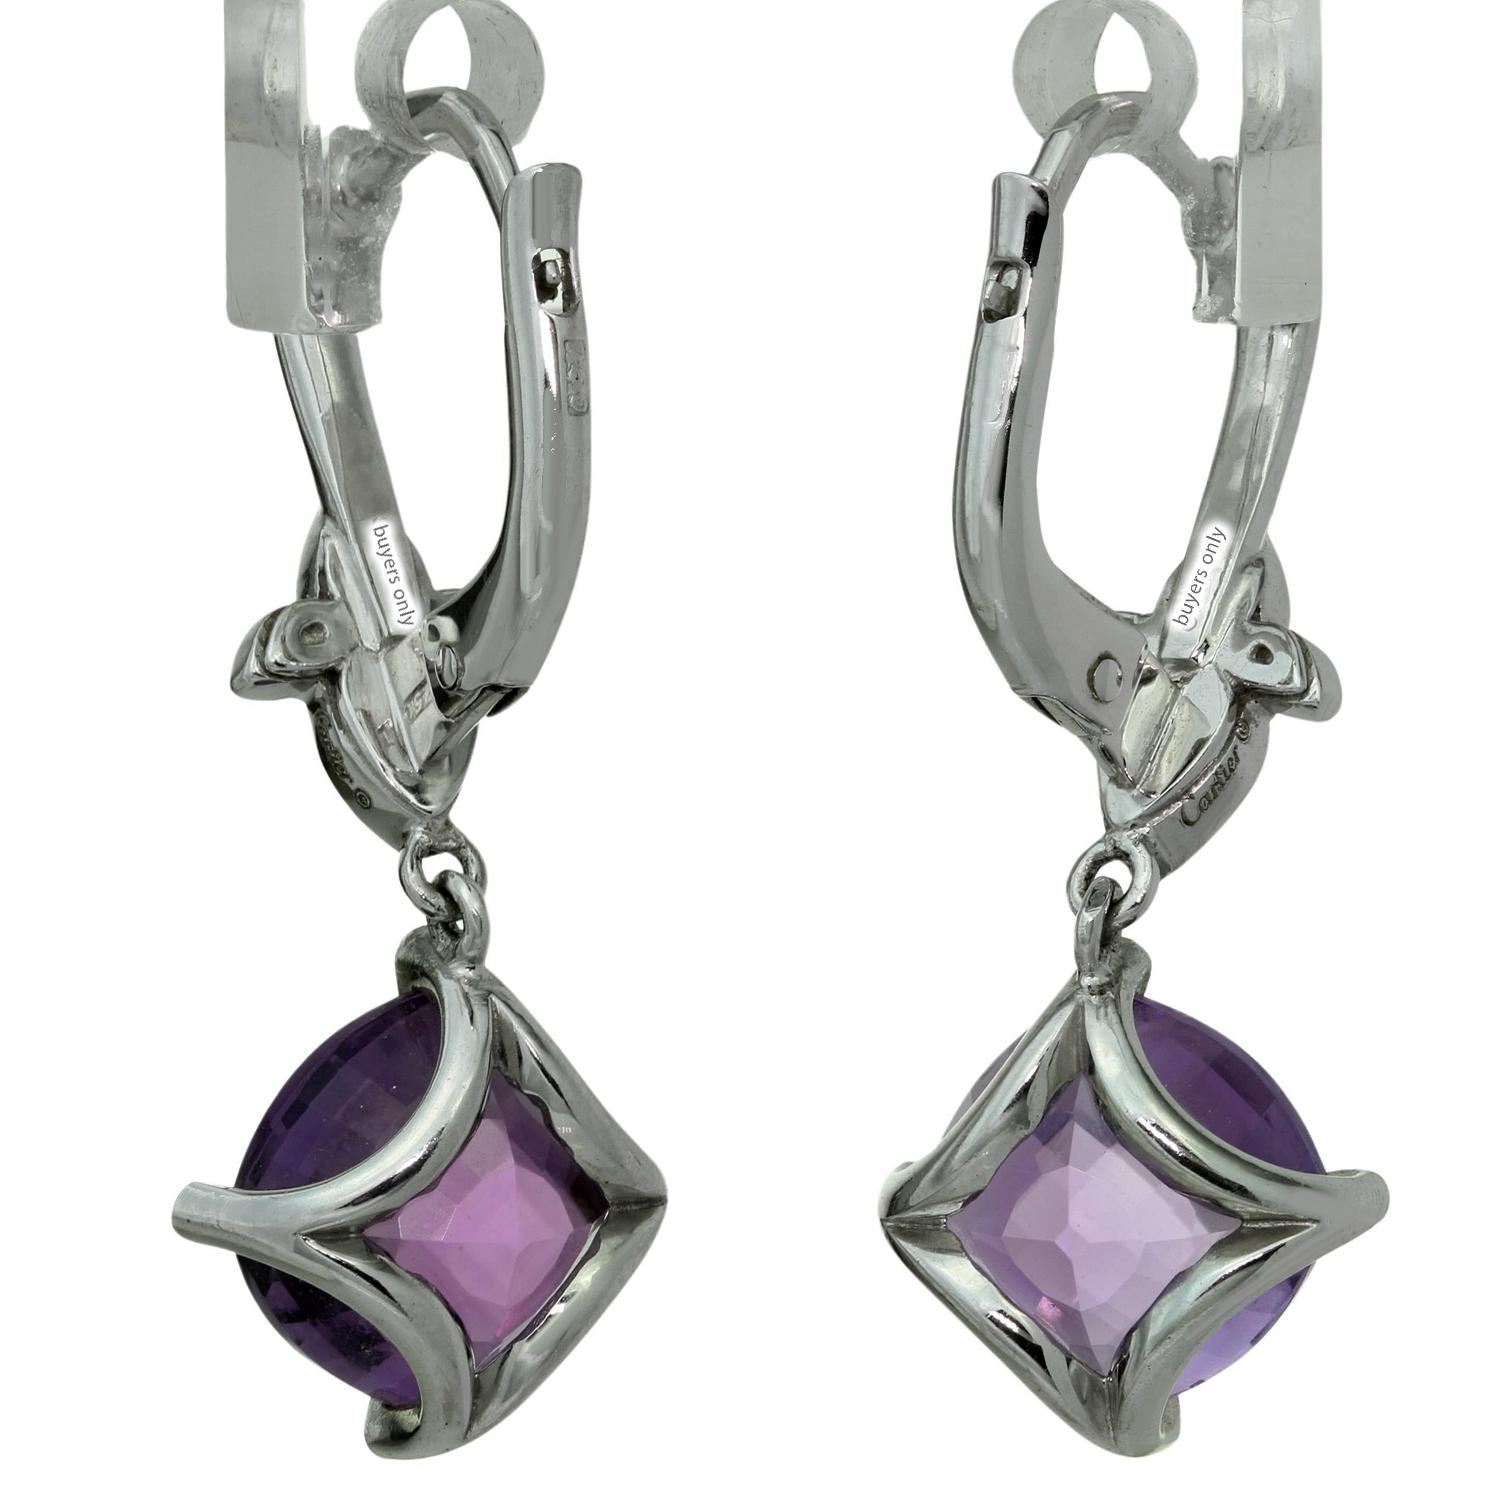 These fabulous dangling earrings from Cartier's elegant Inde Mysterieuse collection are crafted in 18k white gold, set with faceted amethyst gemstones and accented with brilliant-cut round D-F VVS1-VVS2 diamonds. Made in France circa 2010s.